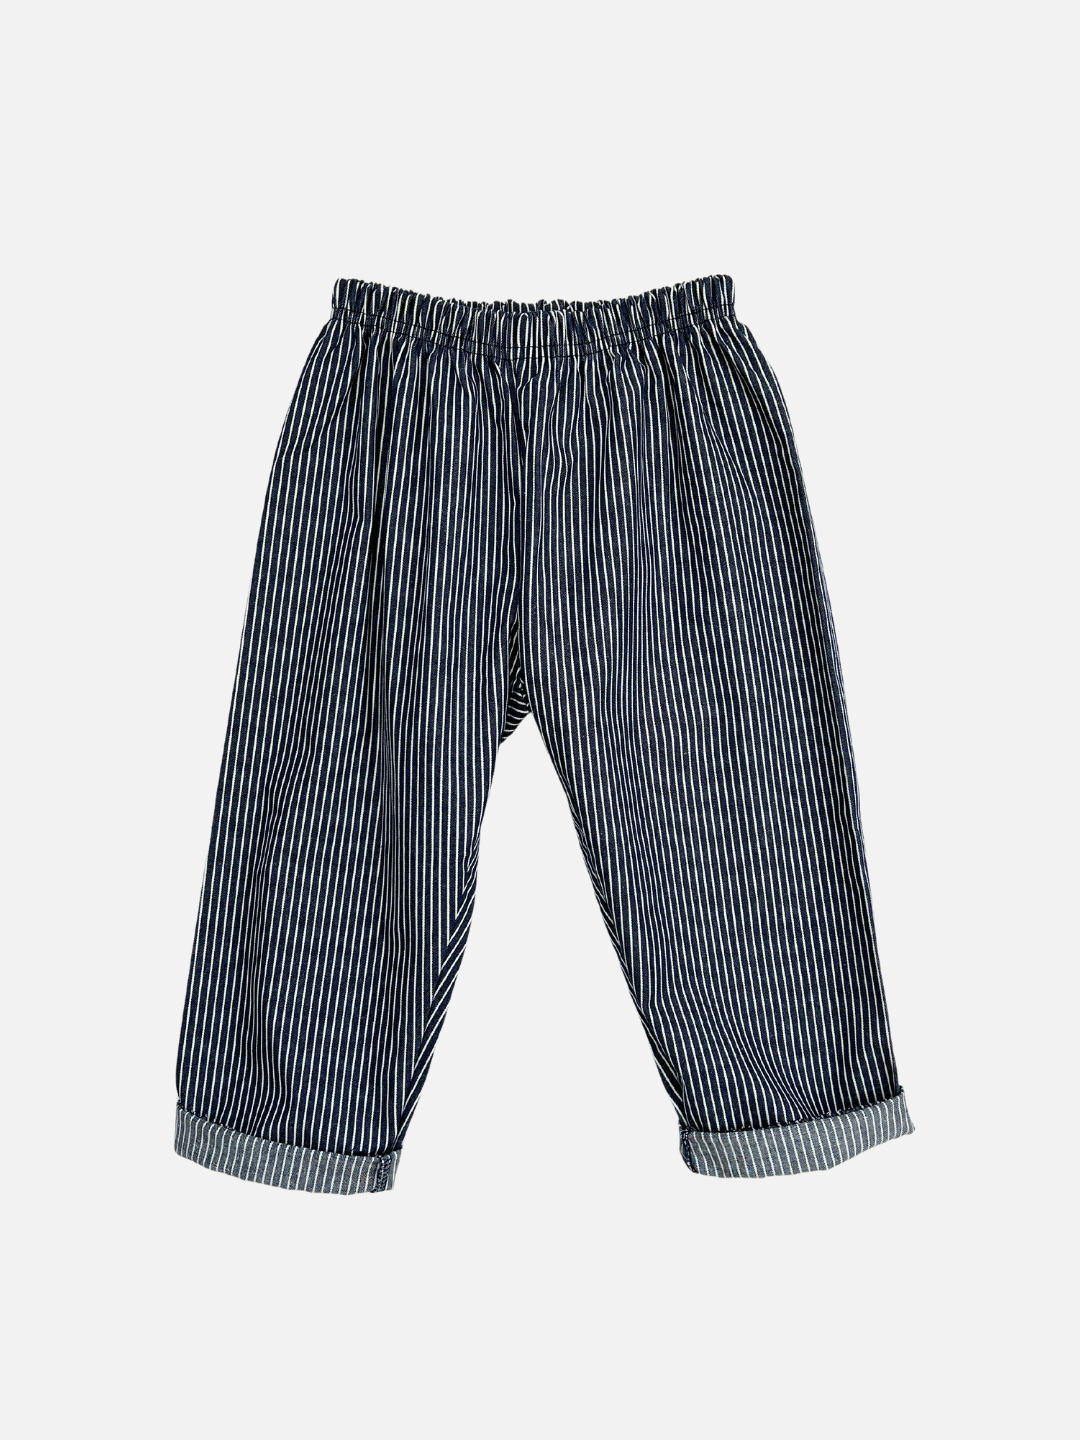 Front view of kids dark blue pants with narrow white vertical stripes, cuffed at the ankle.